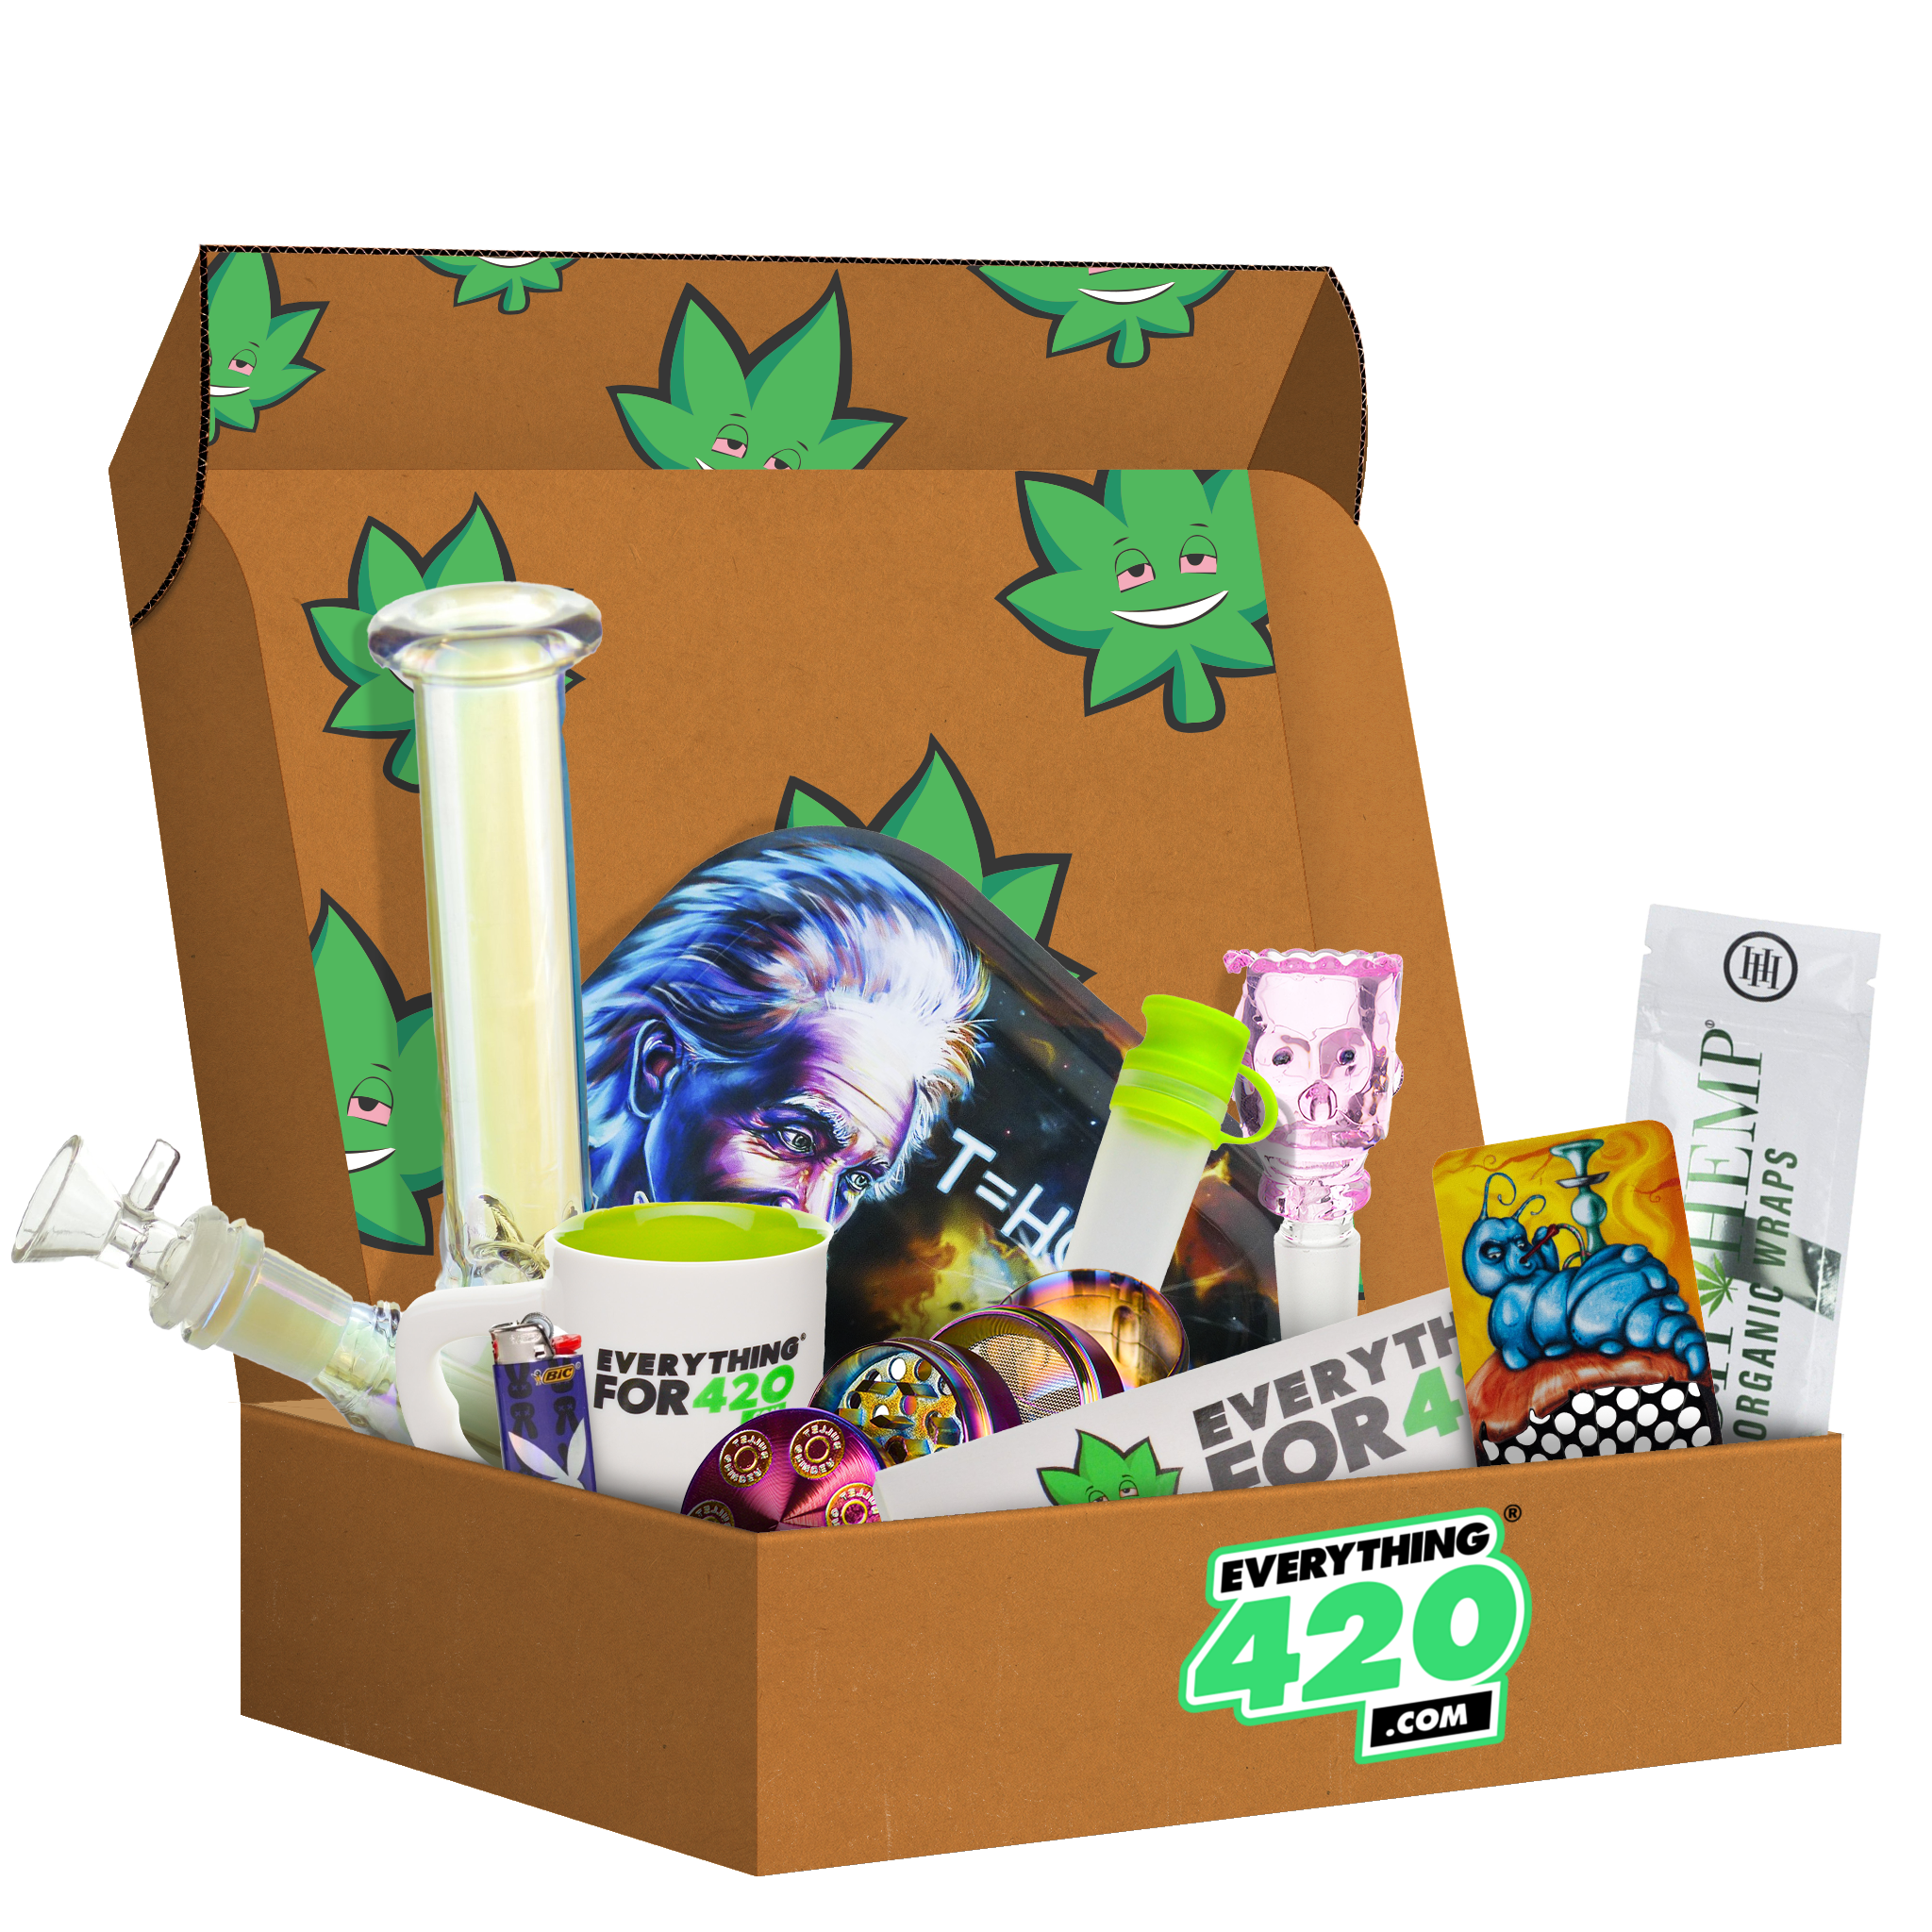 Buy a one time $10 Mystery Stoner Box with Free Shipping!